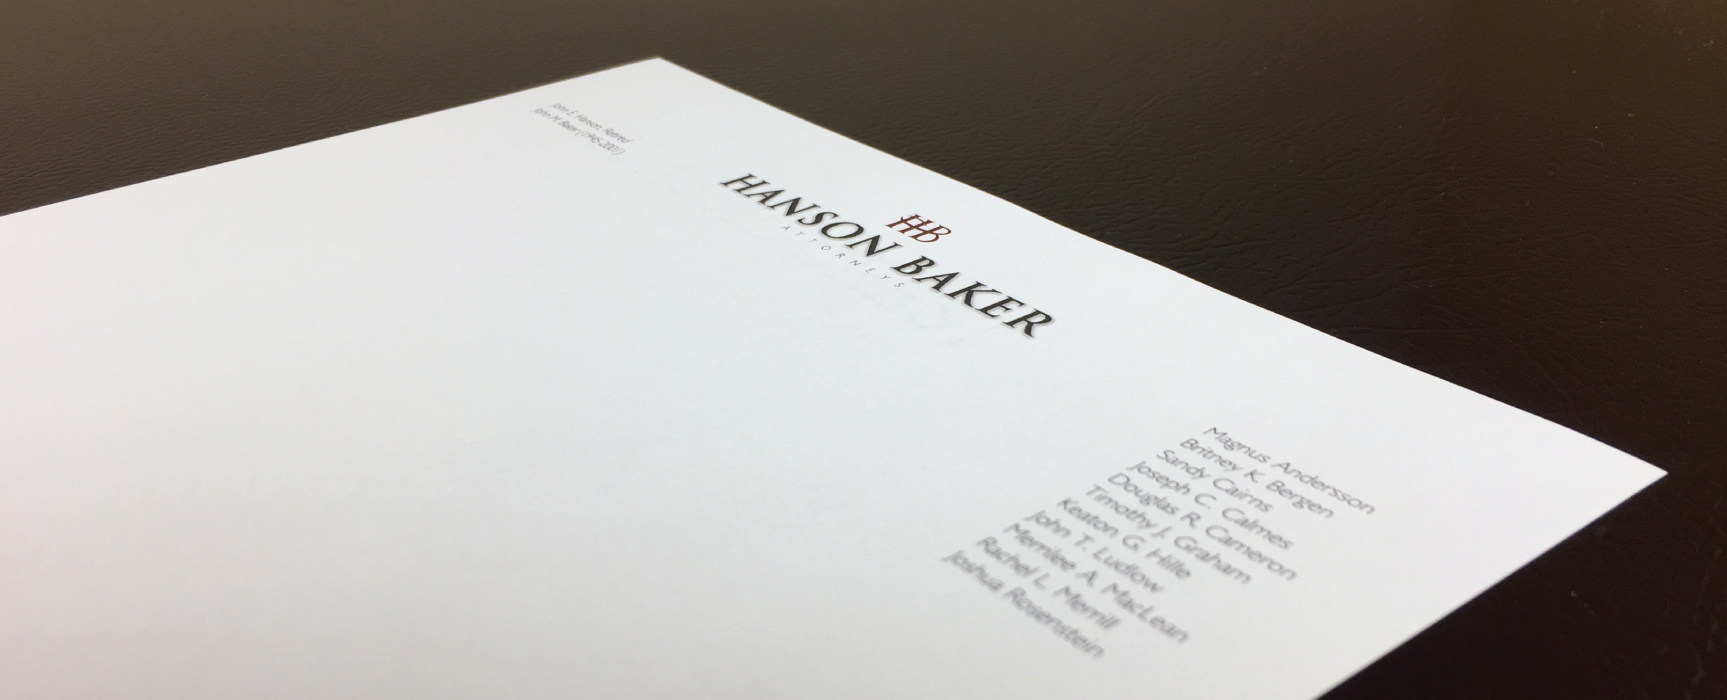 Hanson Baker Law Firm Letterhead printed by Ontra Marketing Group